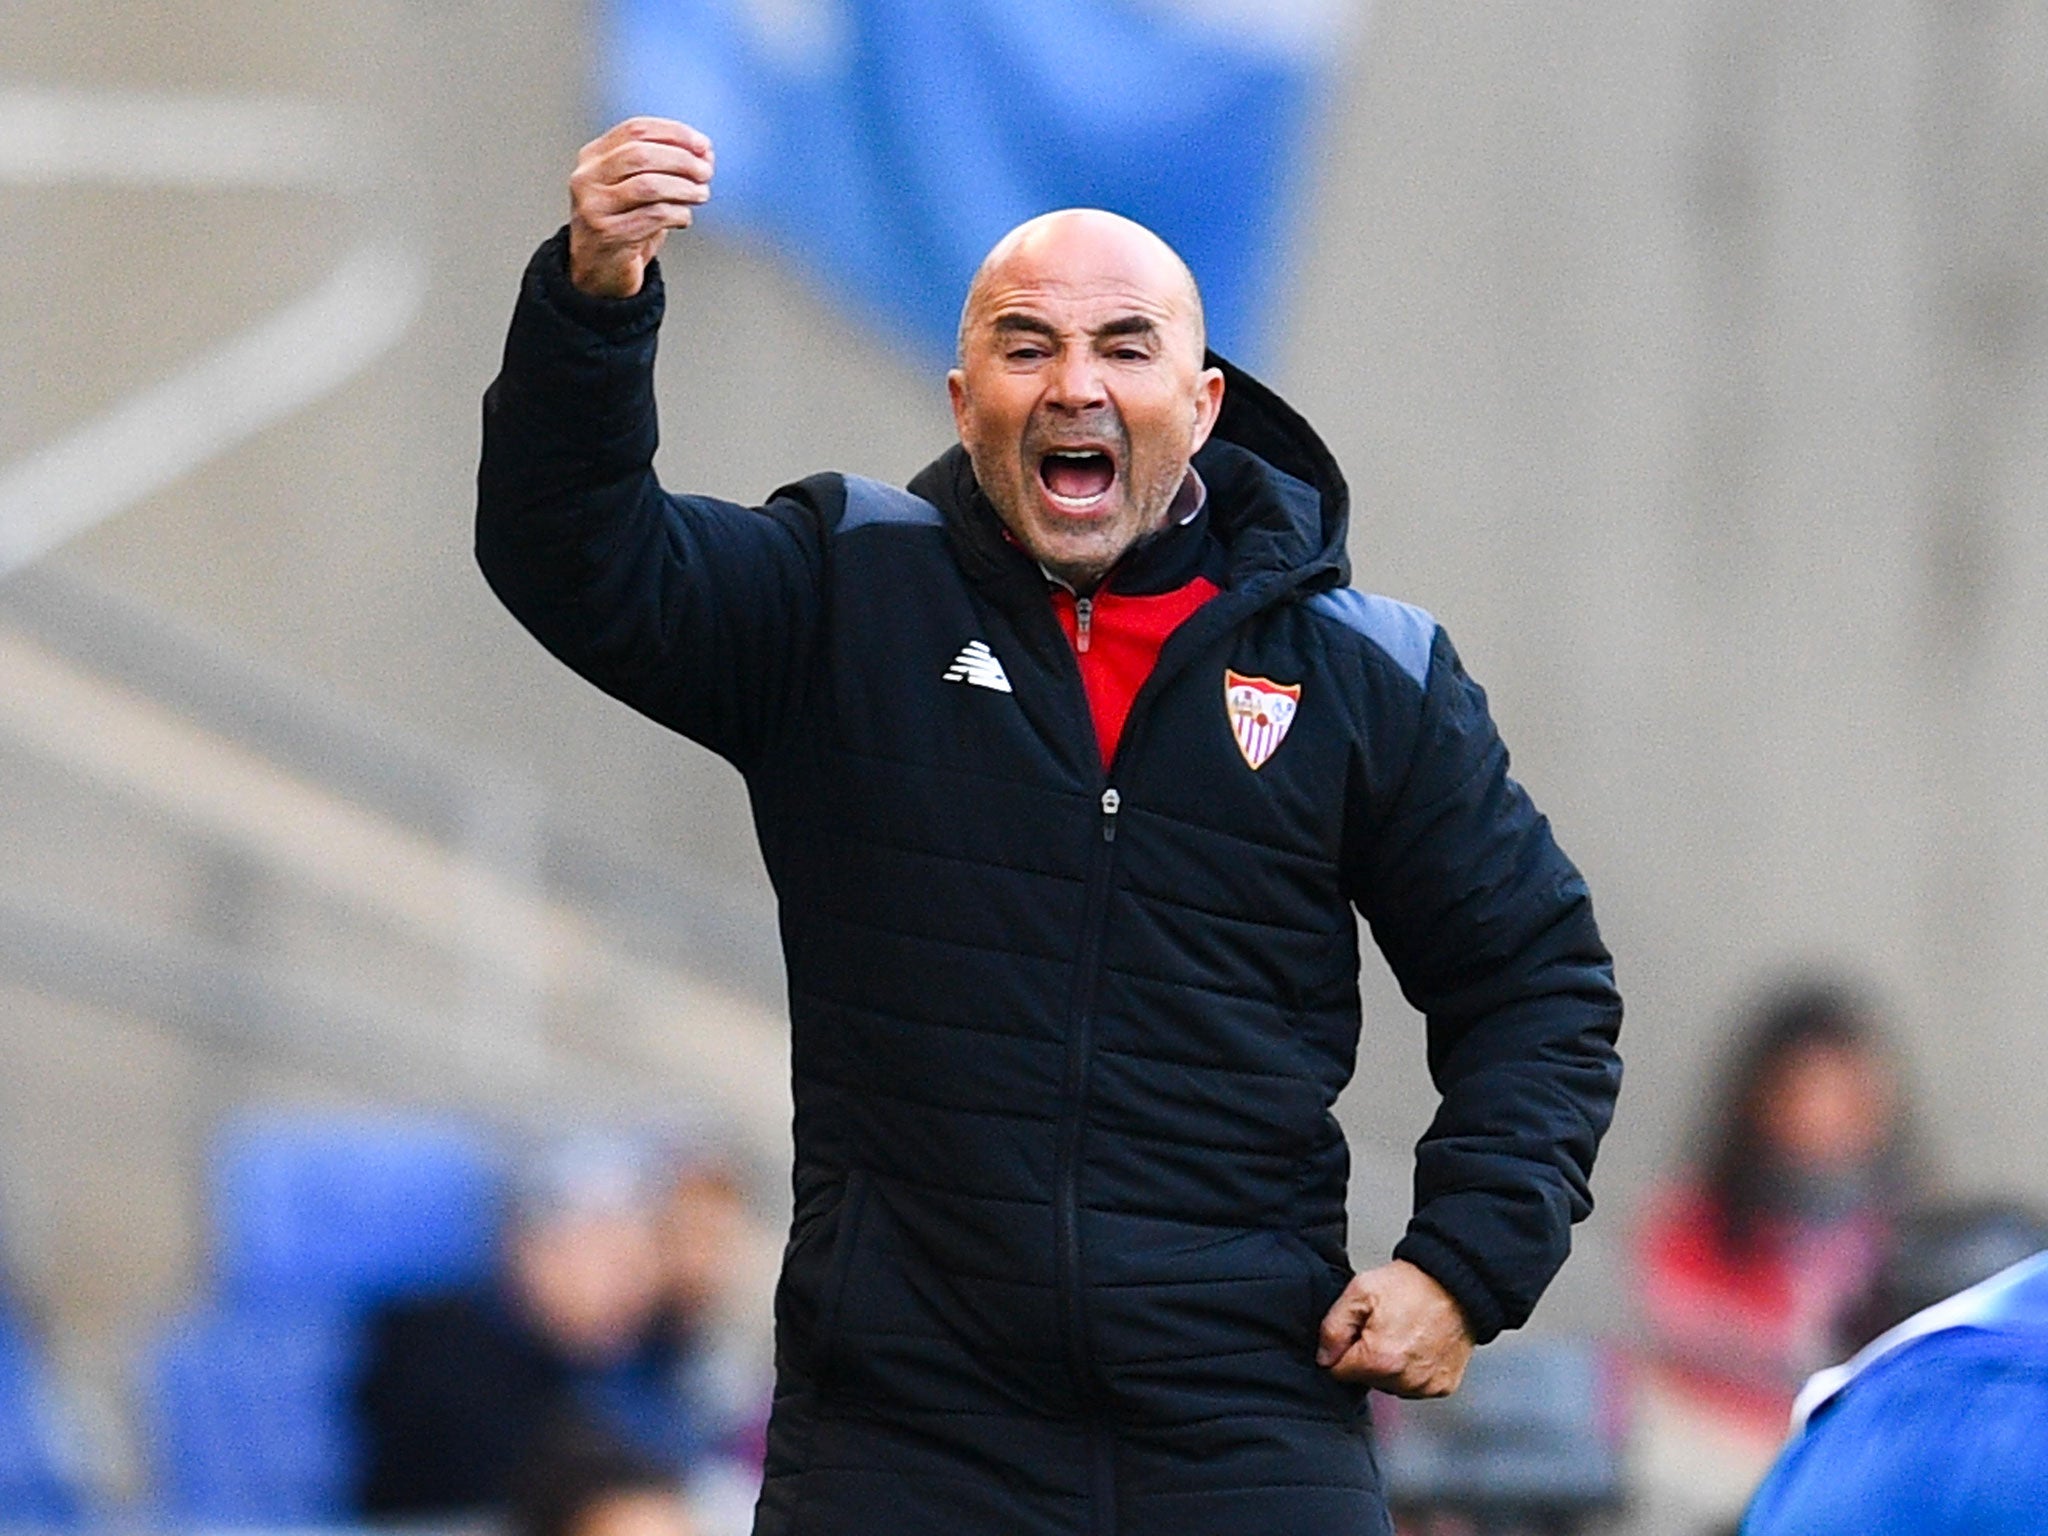 Sevilla manager Jorge Sampaoli is already among the best managers in the world